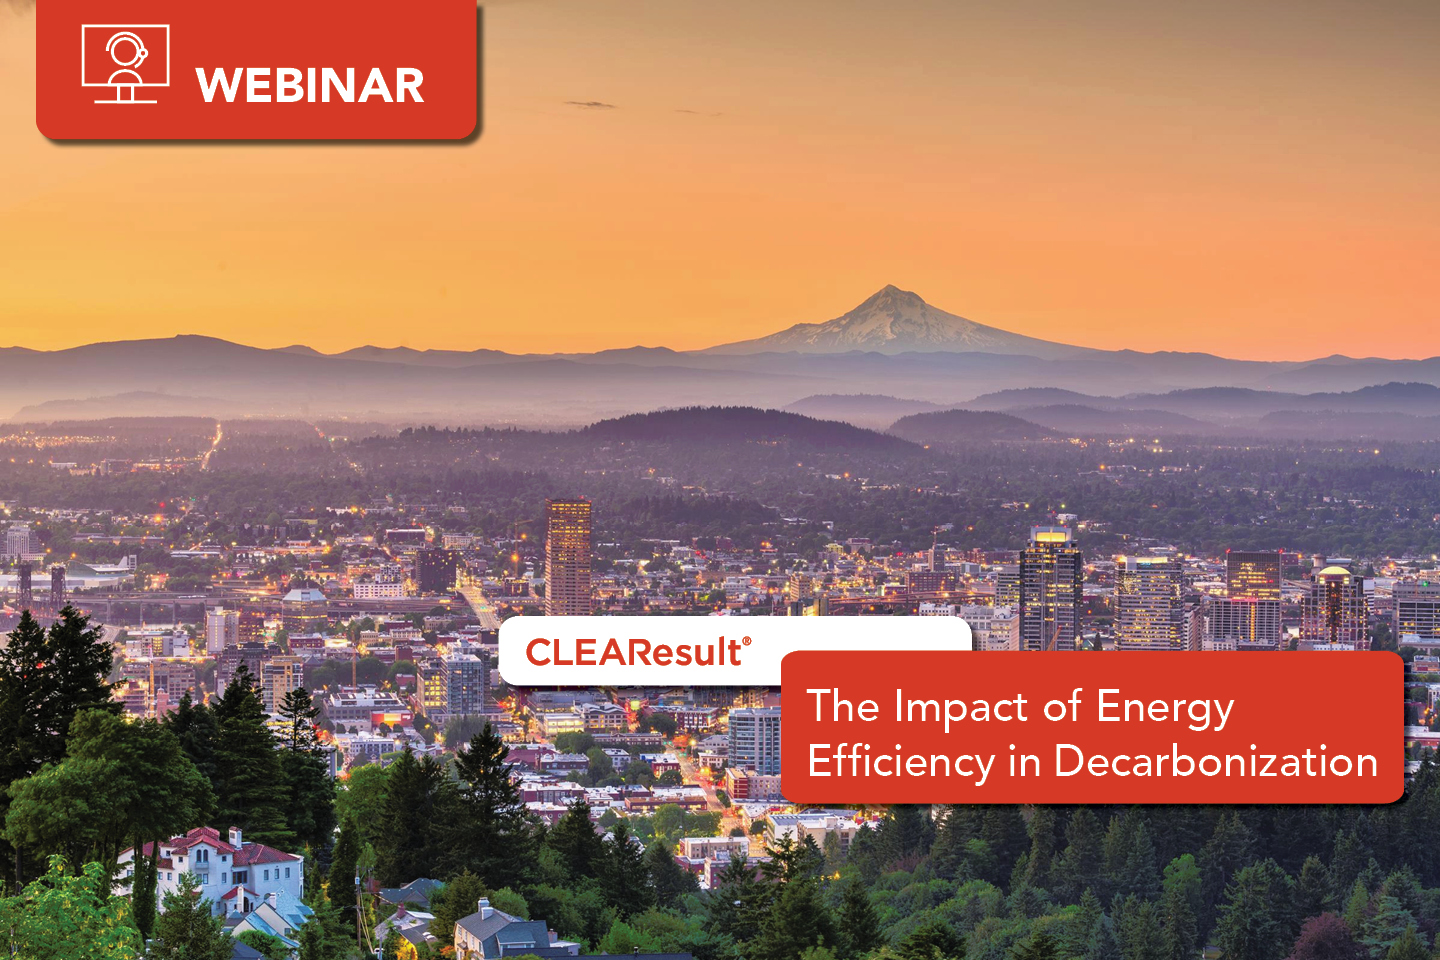 Watch our full webinar, The Impact of Energy Efficiency in Decarbonization